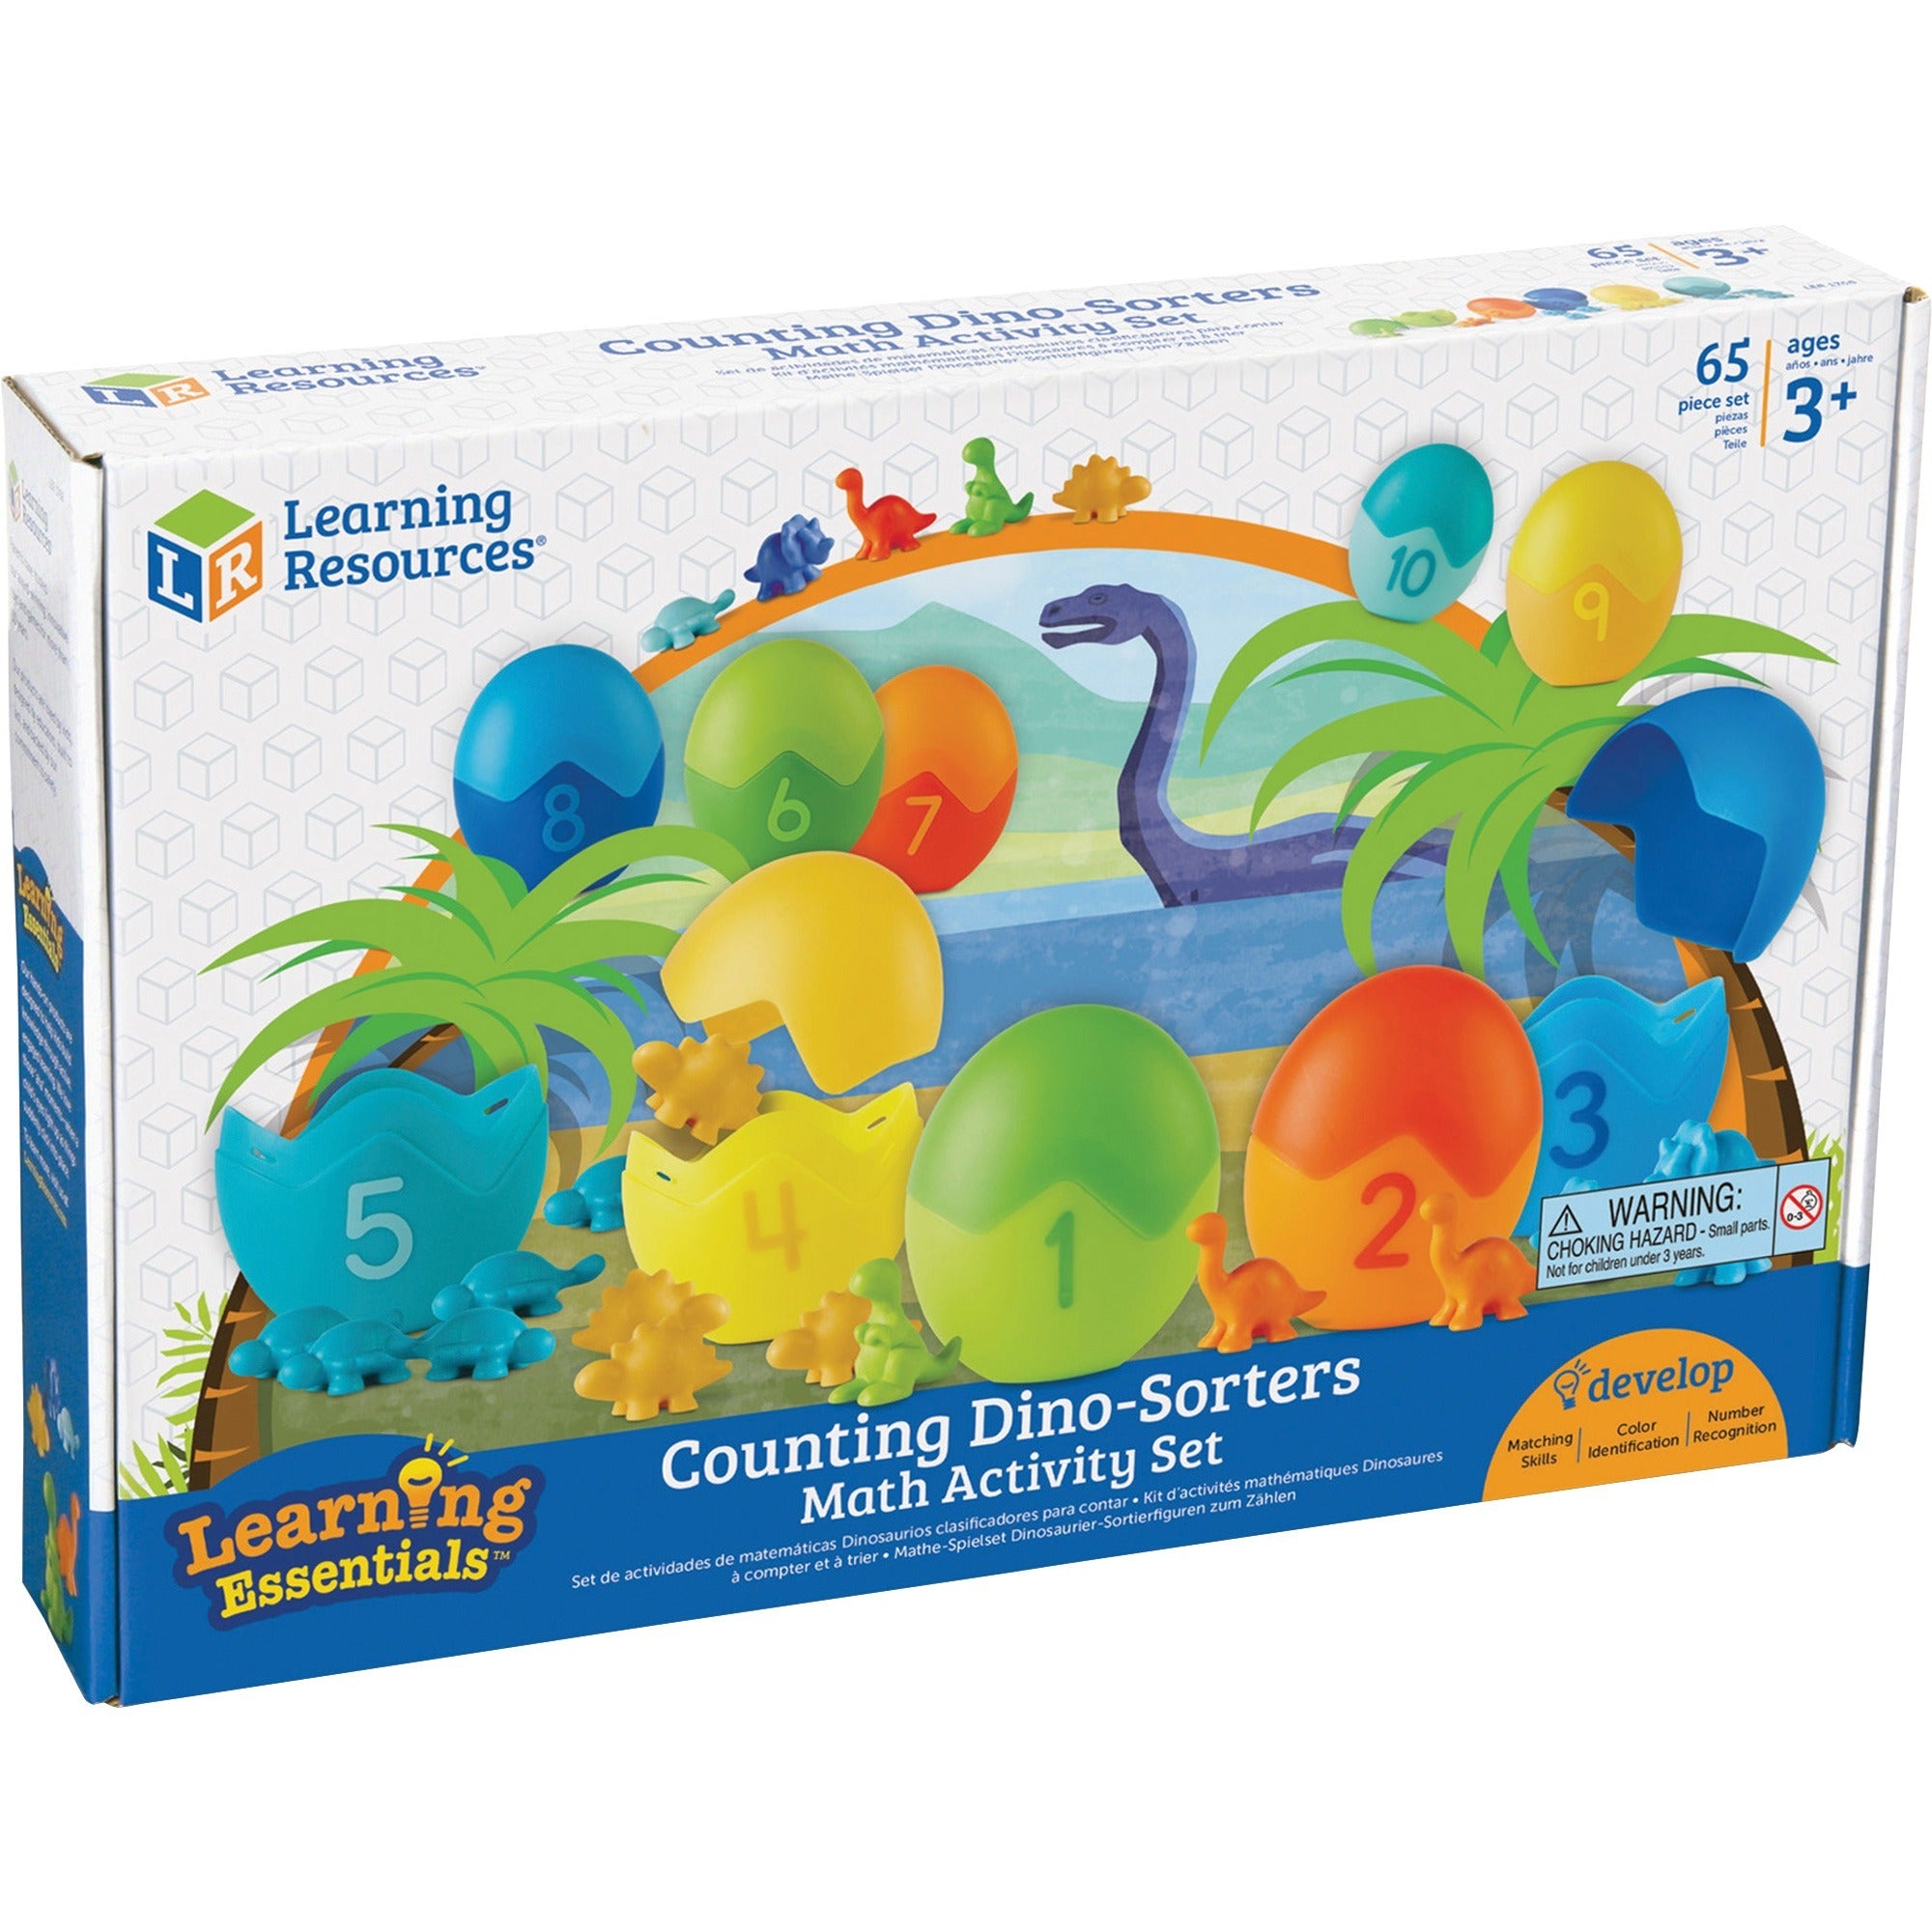 learning-resources-counting-dino-sorters-math-activity-set-theme-subject-learning-skill-learning-matching-visual-counting-sorting-patterning-addition-subtraction-imagination-language-development-fine-motor-eye-hand-coordination--_lrnler1768 - 1